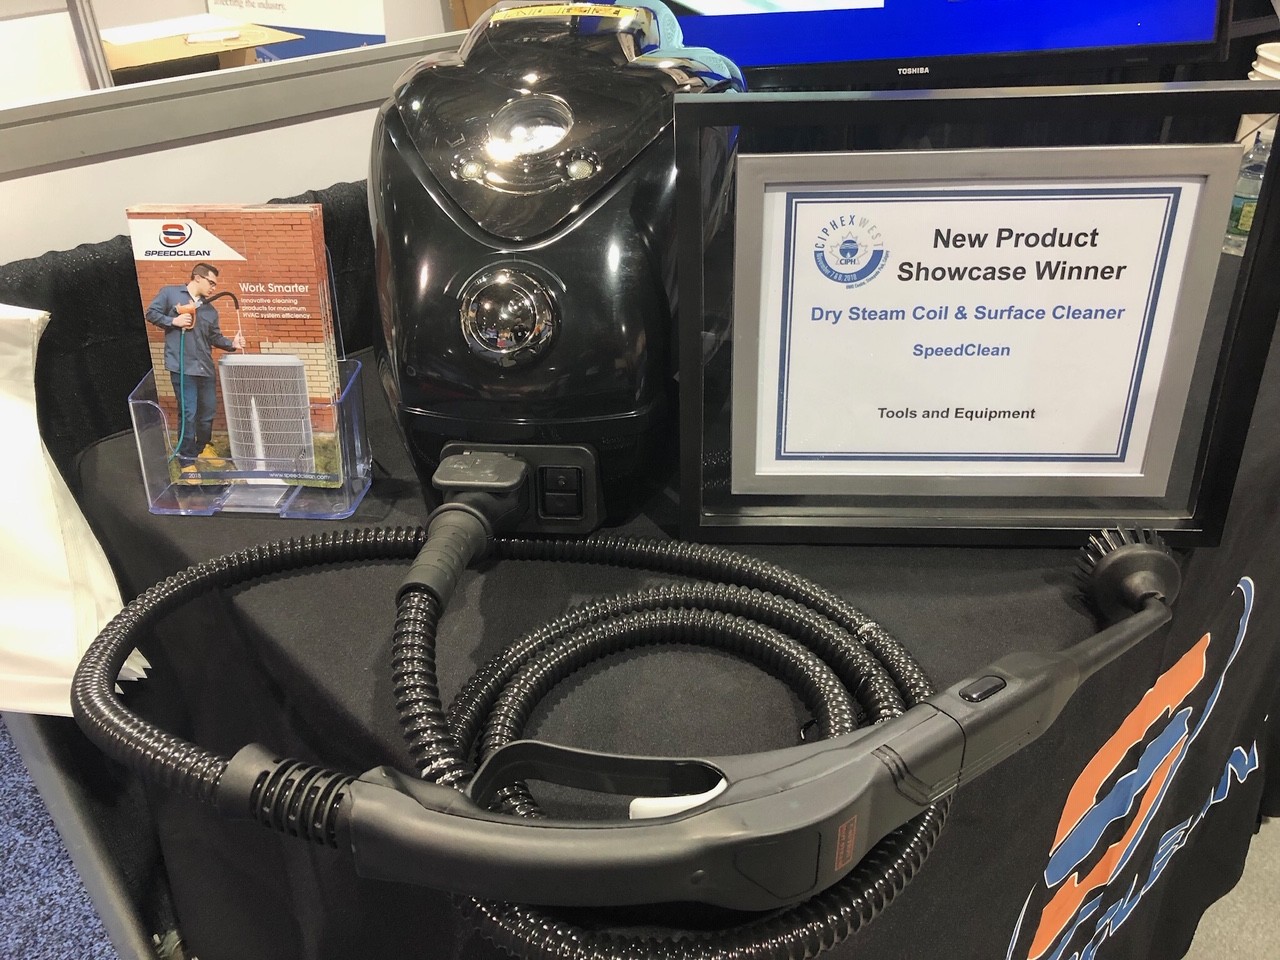 SpeedClean’s Dry Steam Coil & Surface Cleaner is a Winner at CIPHEX West!